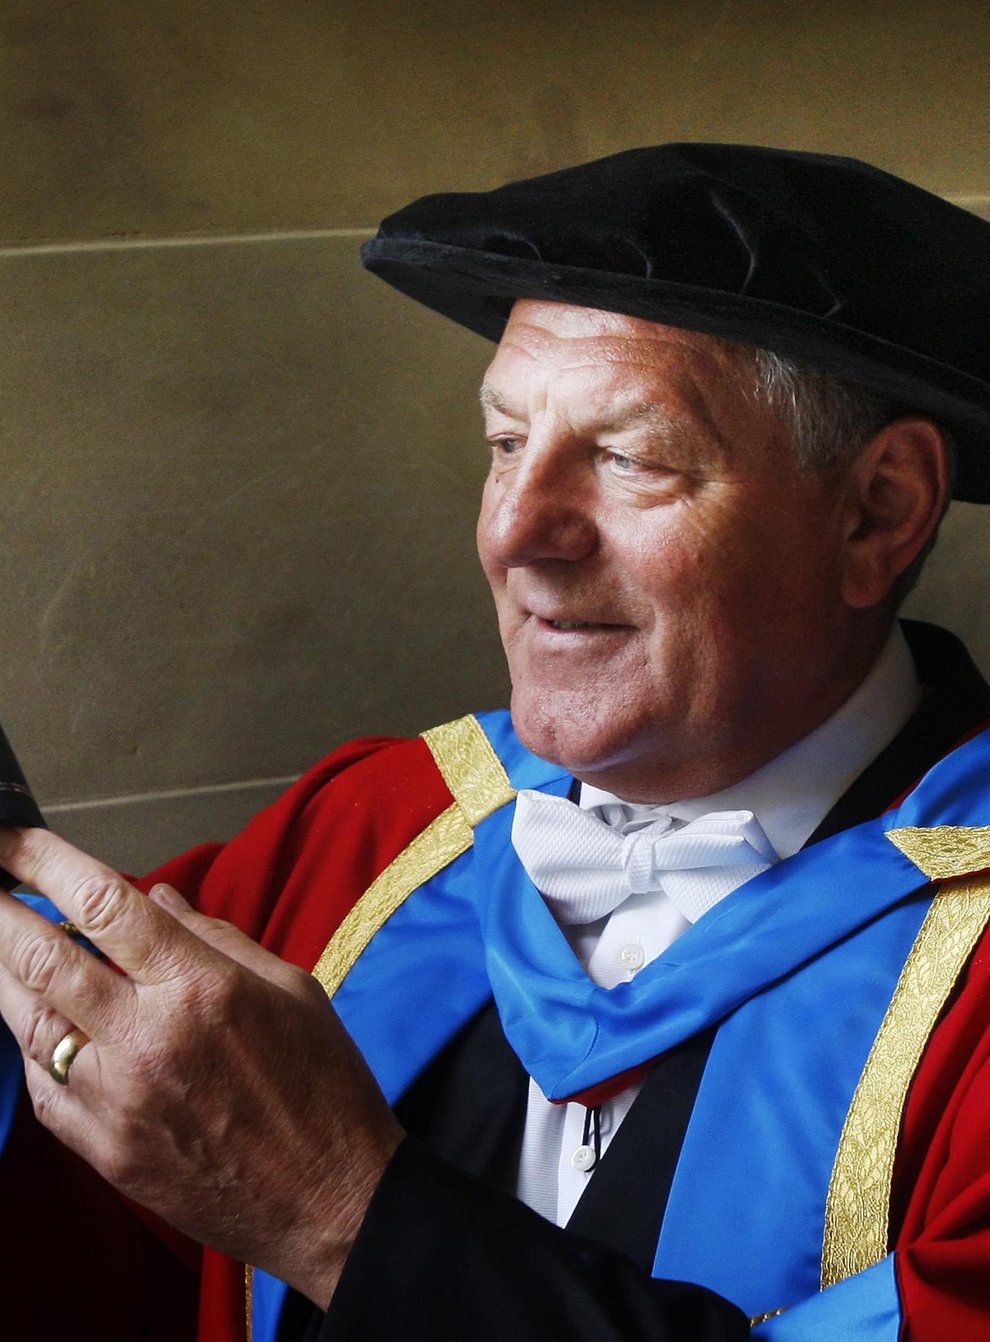 Former Rangers manager Walter Smith receiving an honorary degree from Glasgow Caledonian University (Danny Lawson/PA)